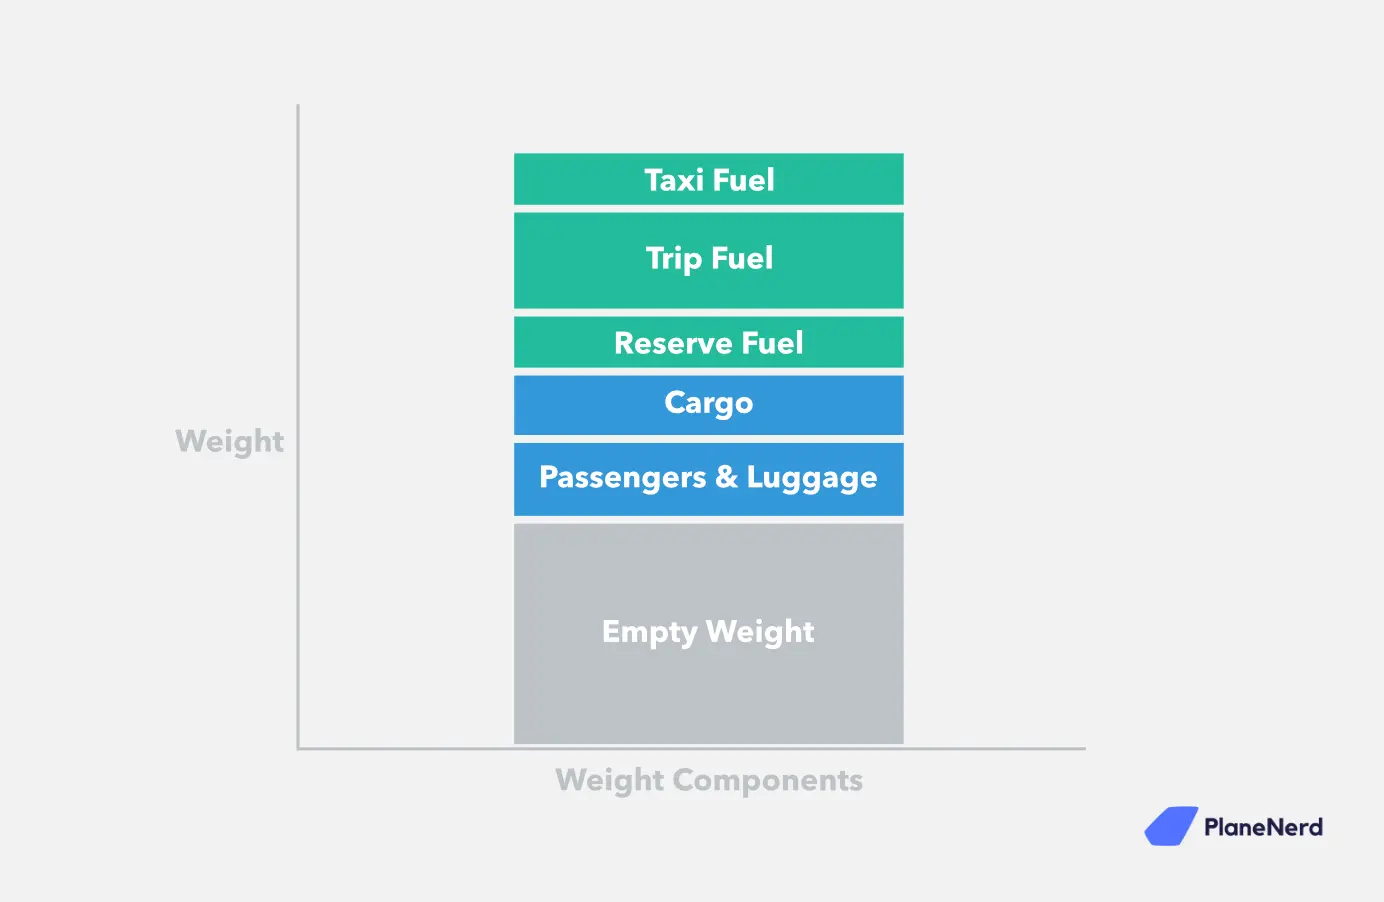 Maximum take-off weight components